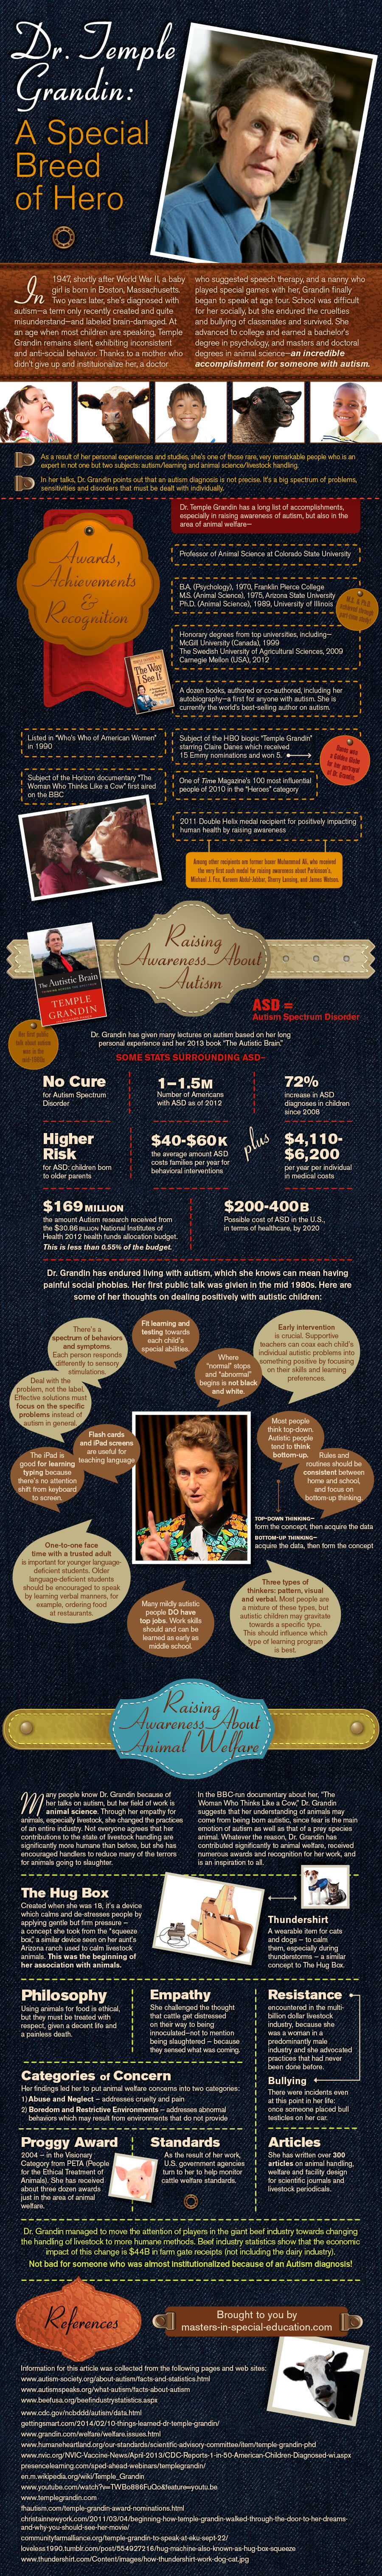 Dr. Temple Grandin: A Special Breed of Hero - Infographic